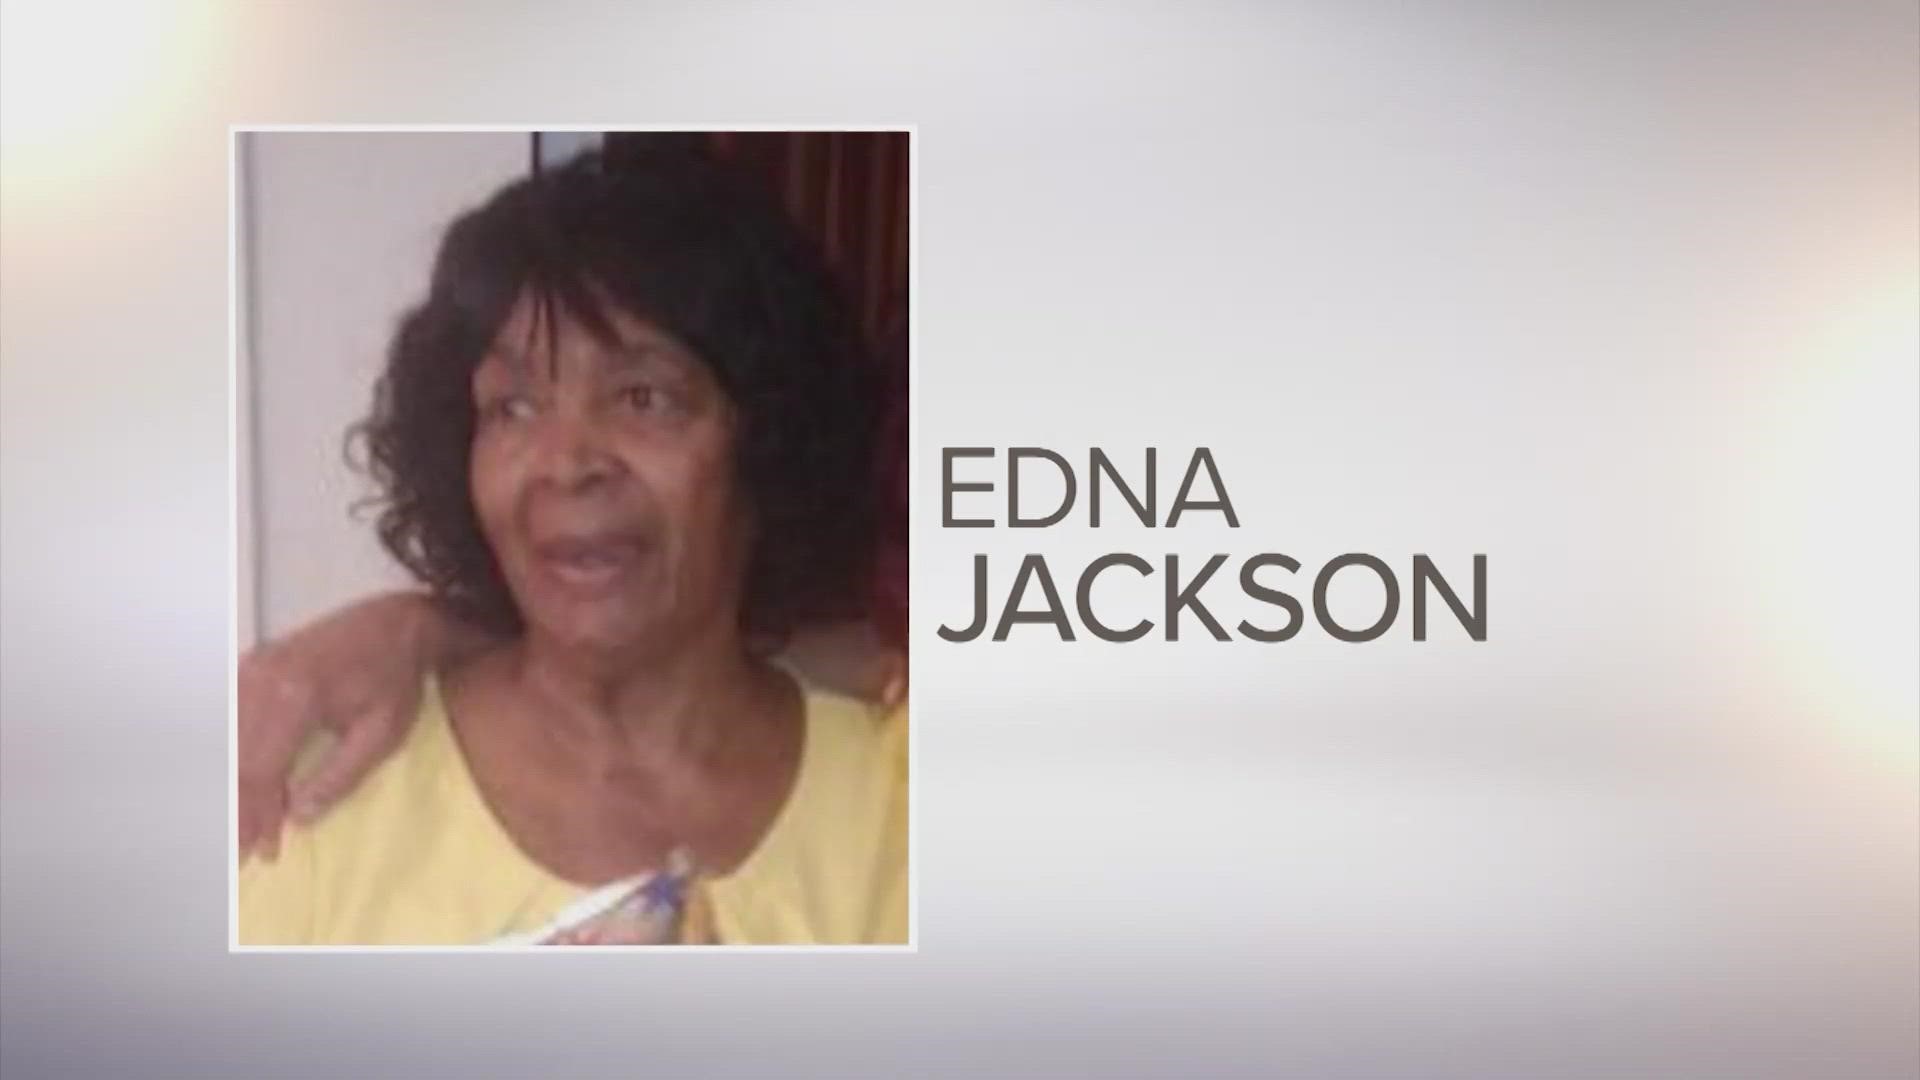 The search for 82-year-old Edna Jackson came to a tragic end when her body was found inside her neighbor's car. Investigators suspect the heat is to blame.